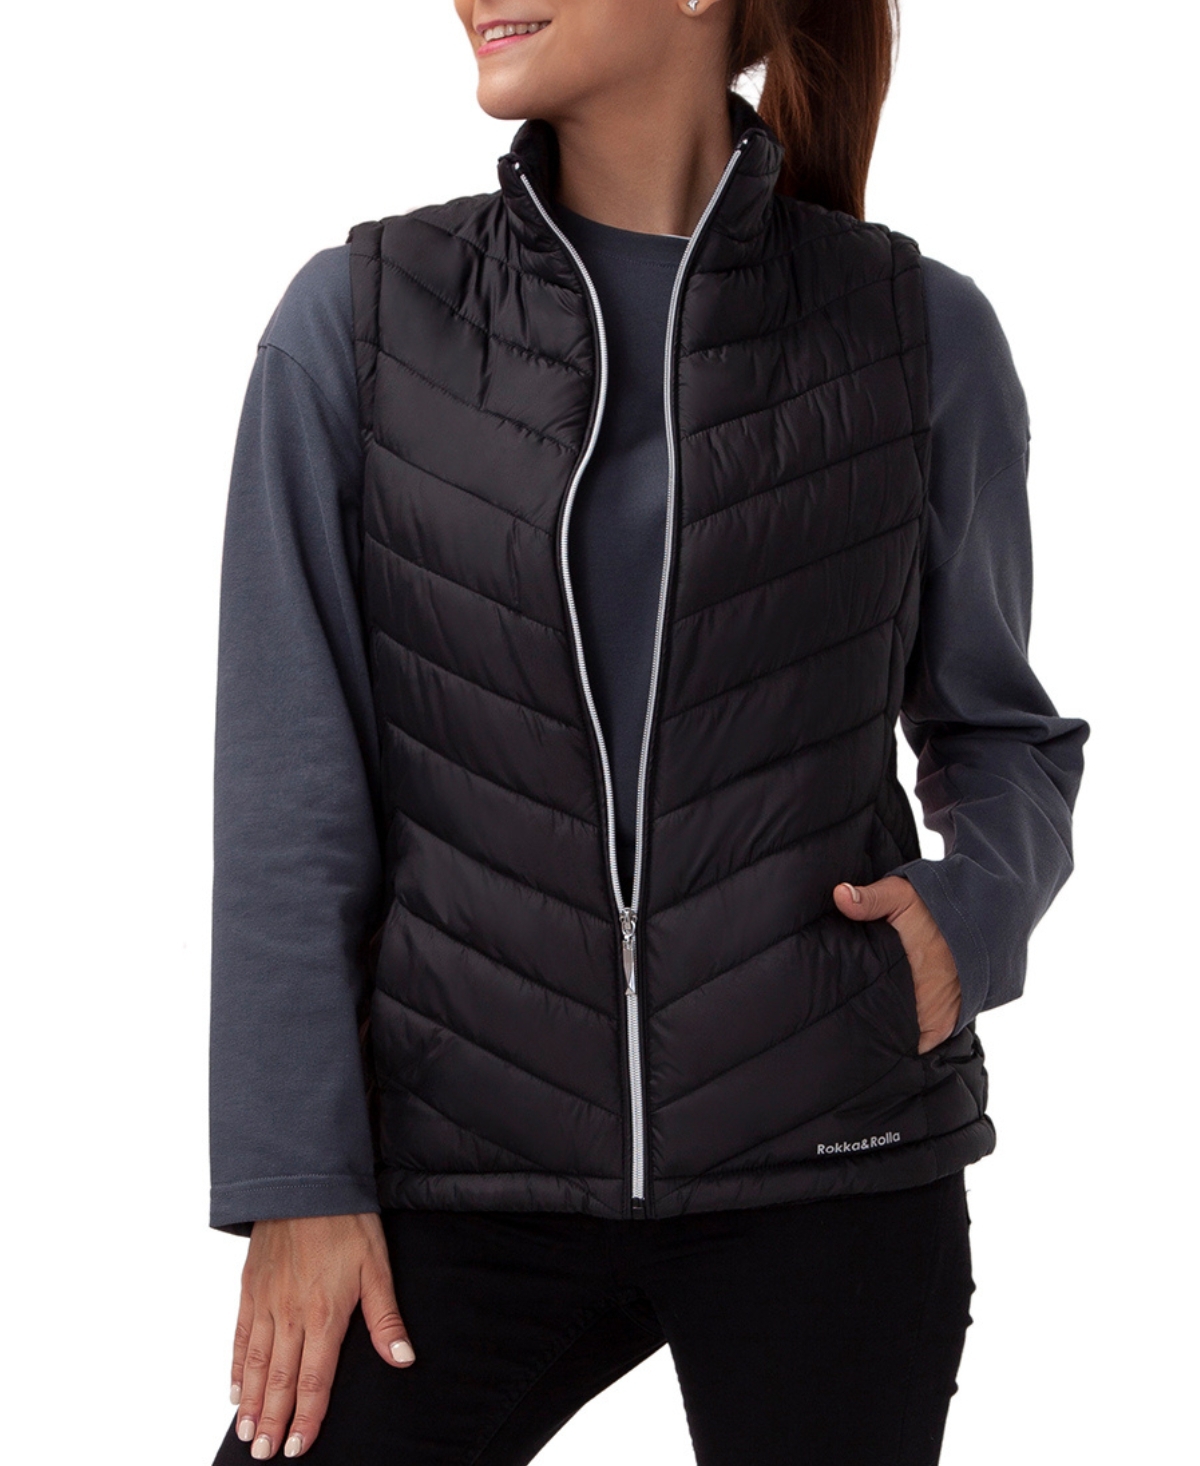 Women's Quilted Soft Fleece Lining Puffer Vest, up to 2XL - Black